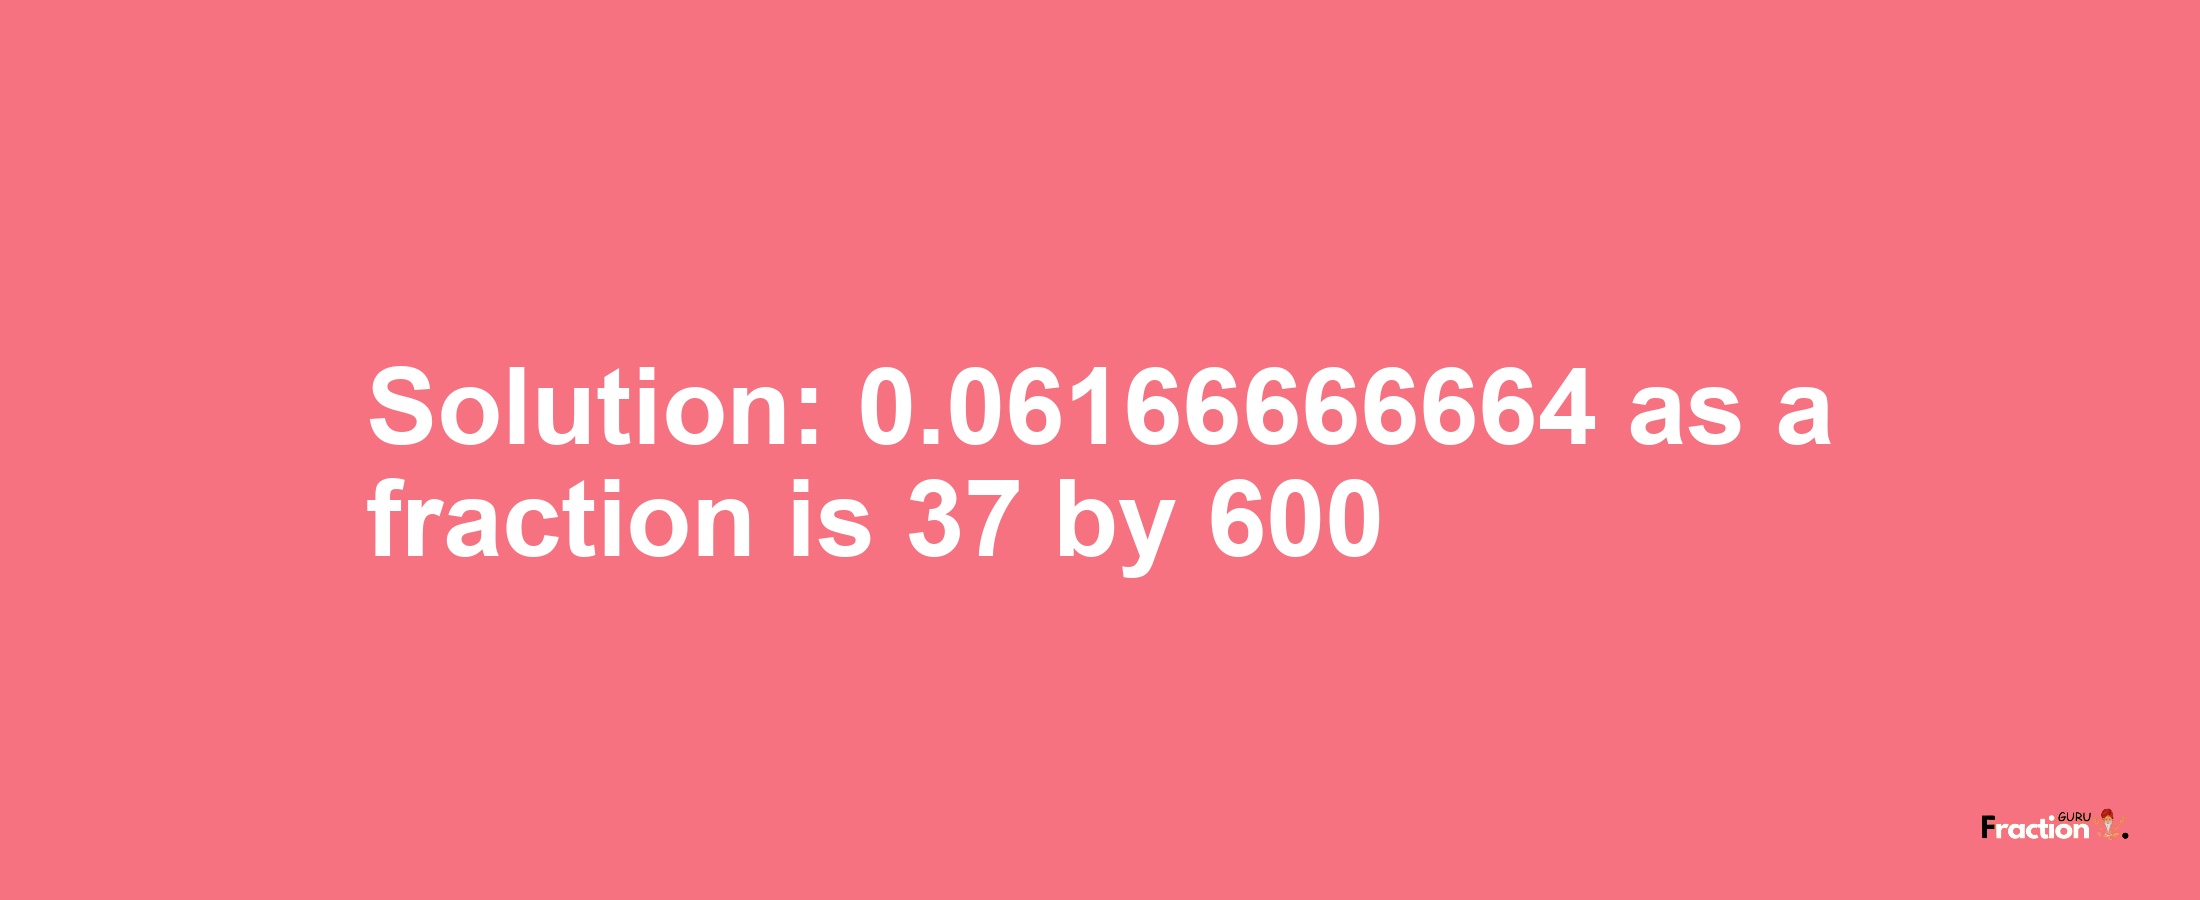 Solution:0.06166666664 as a fraction is 37/600